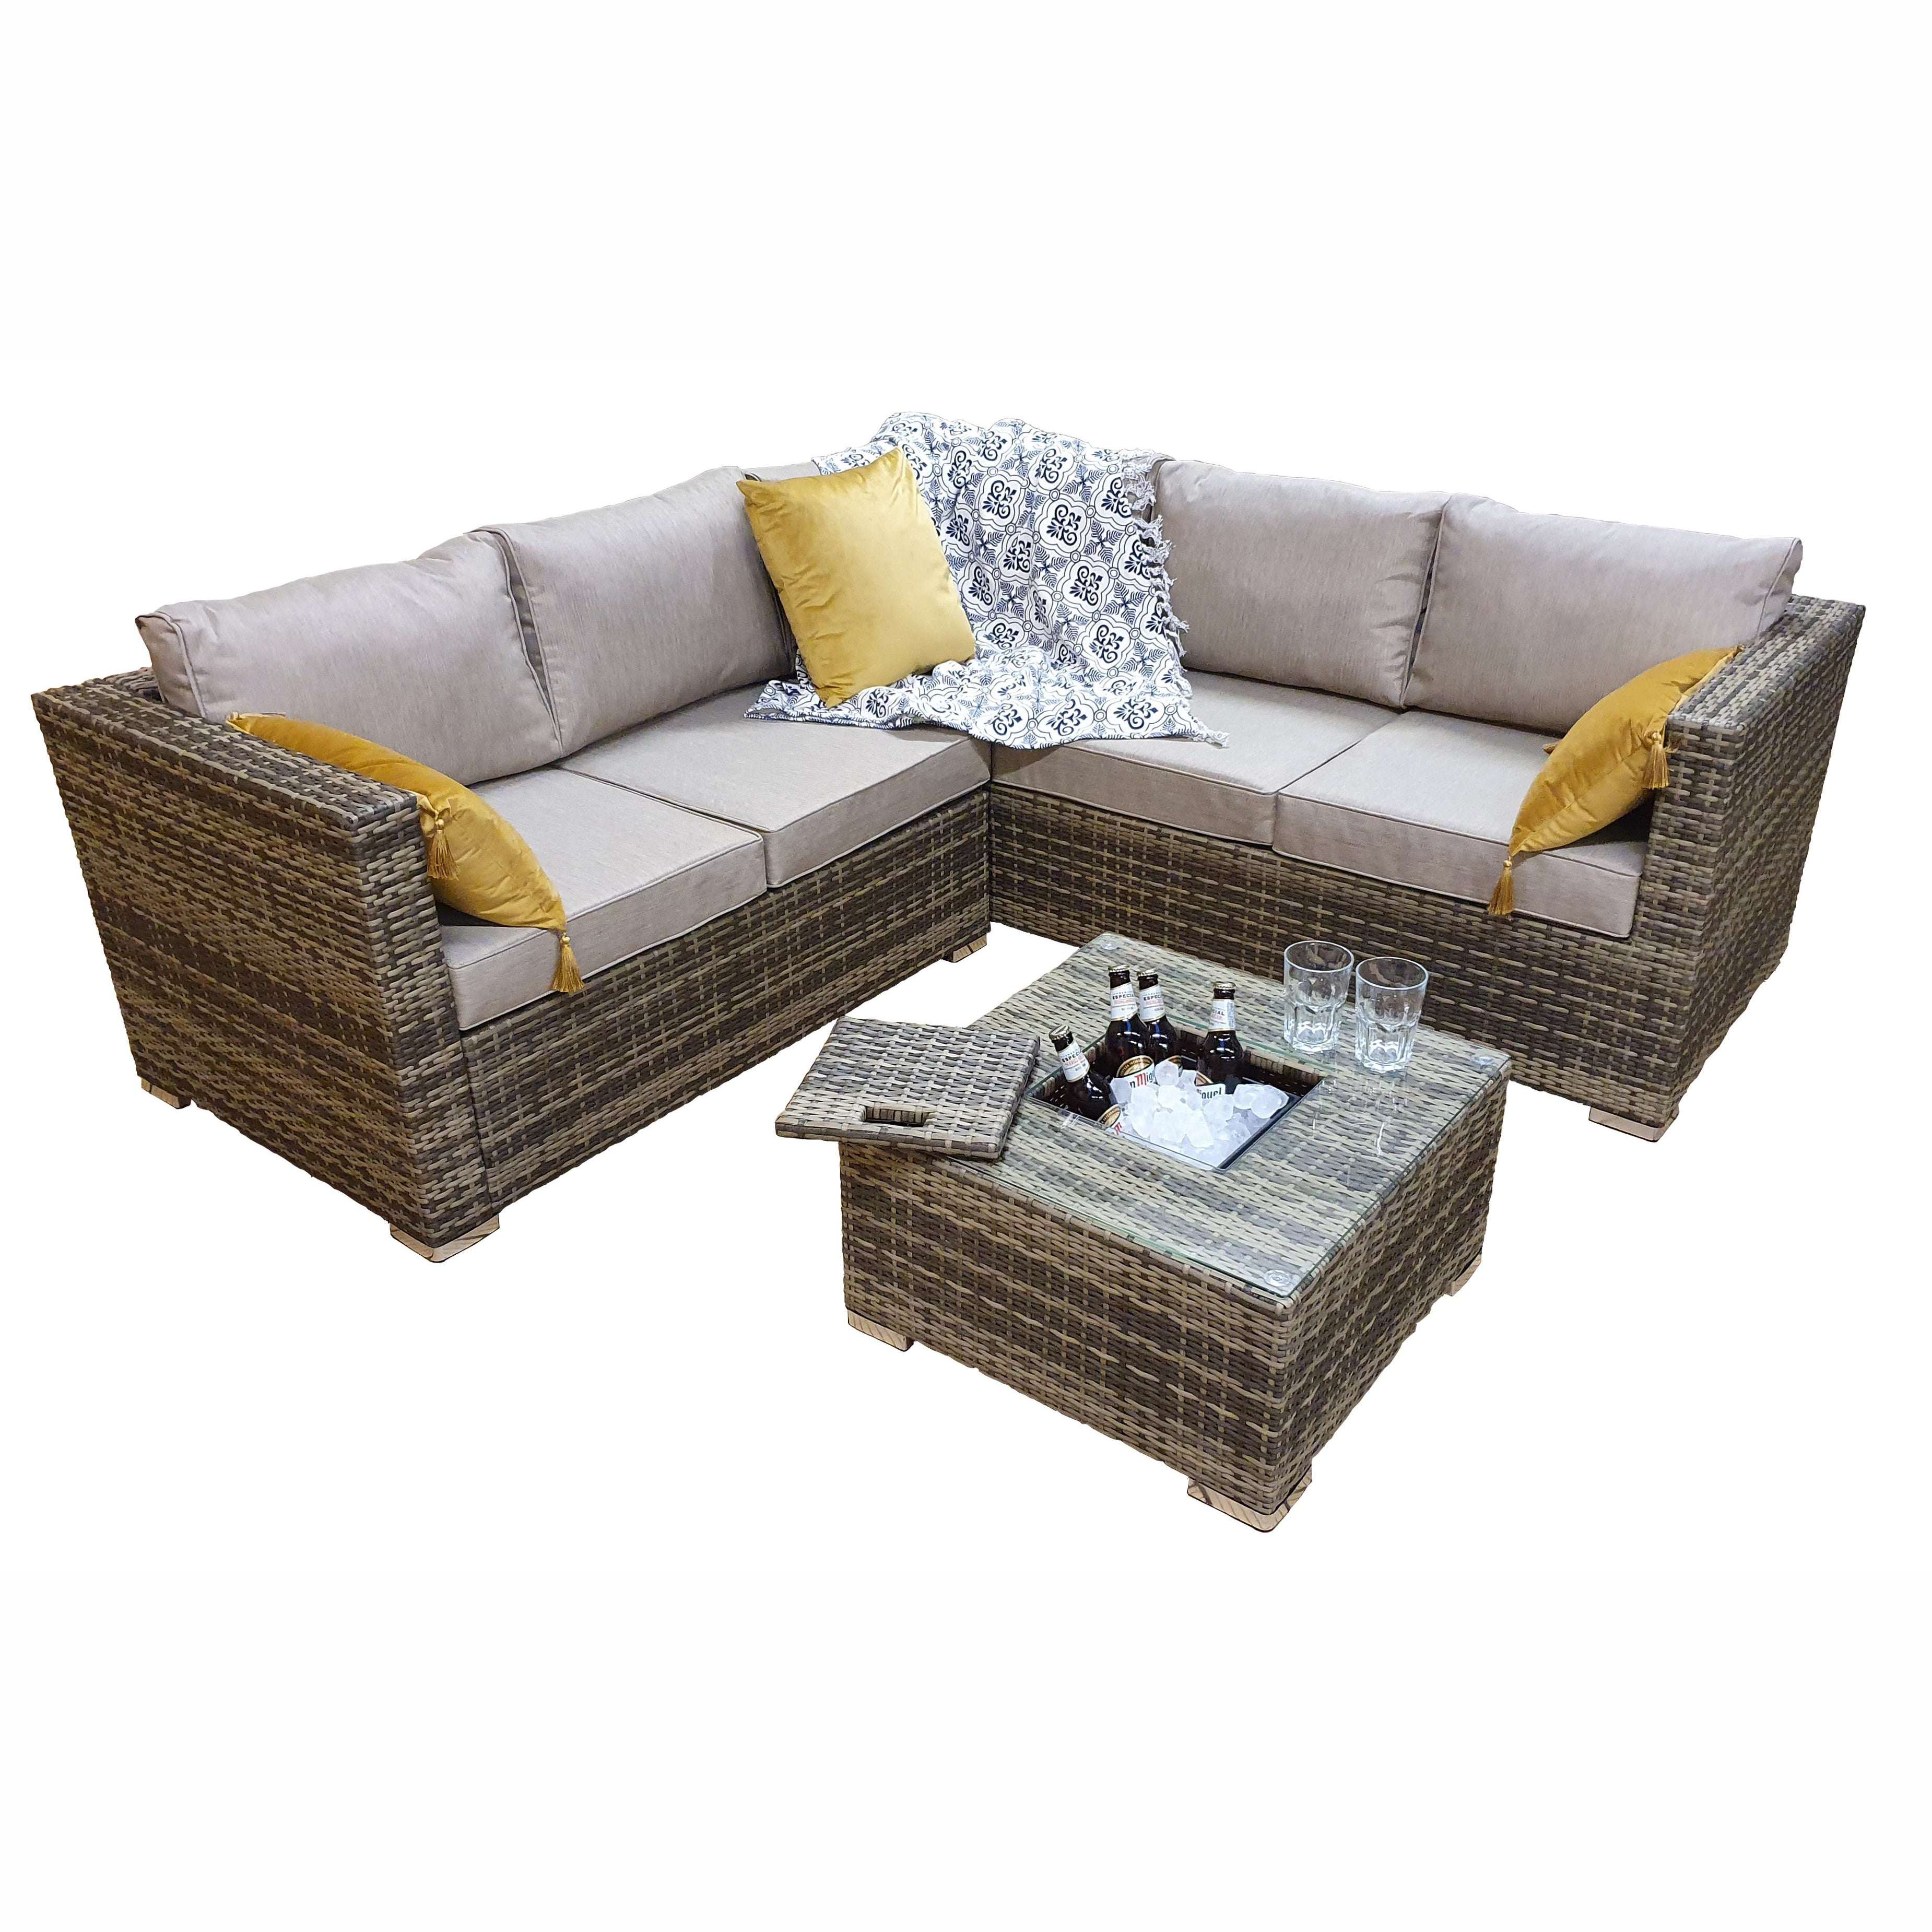 Exceptional Garden:Signature Weave Georgia Sofa Set with Ice Bucket - Mixed Brown